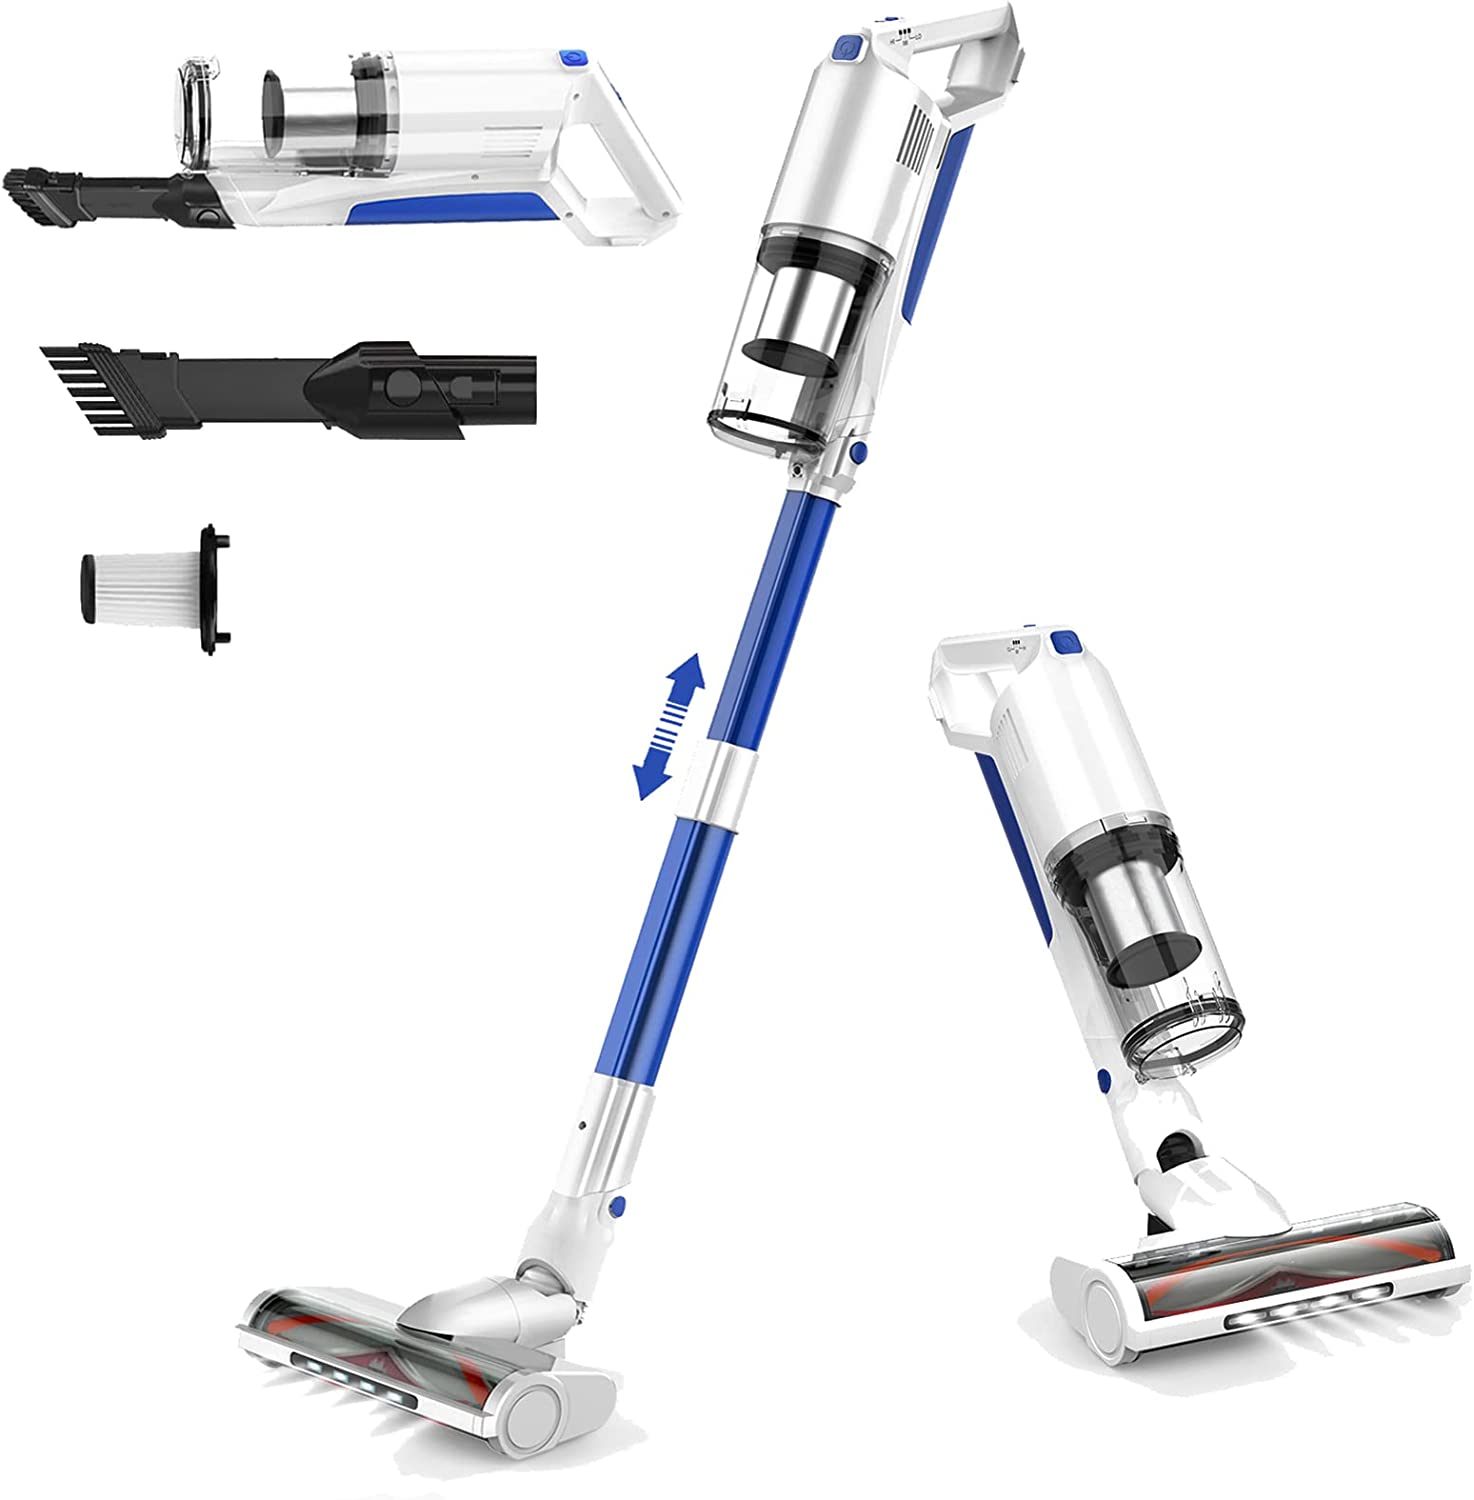 whall Cordless Vacuum Cleaner, Upgraded 25Kpa Suction [...]